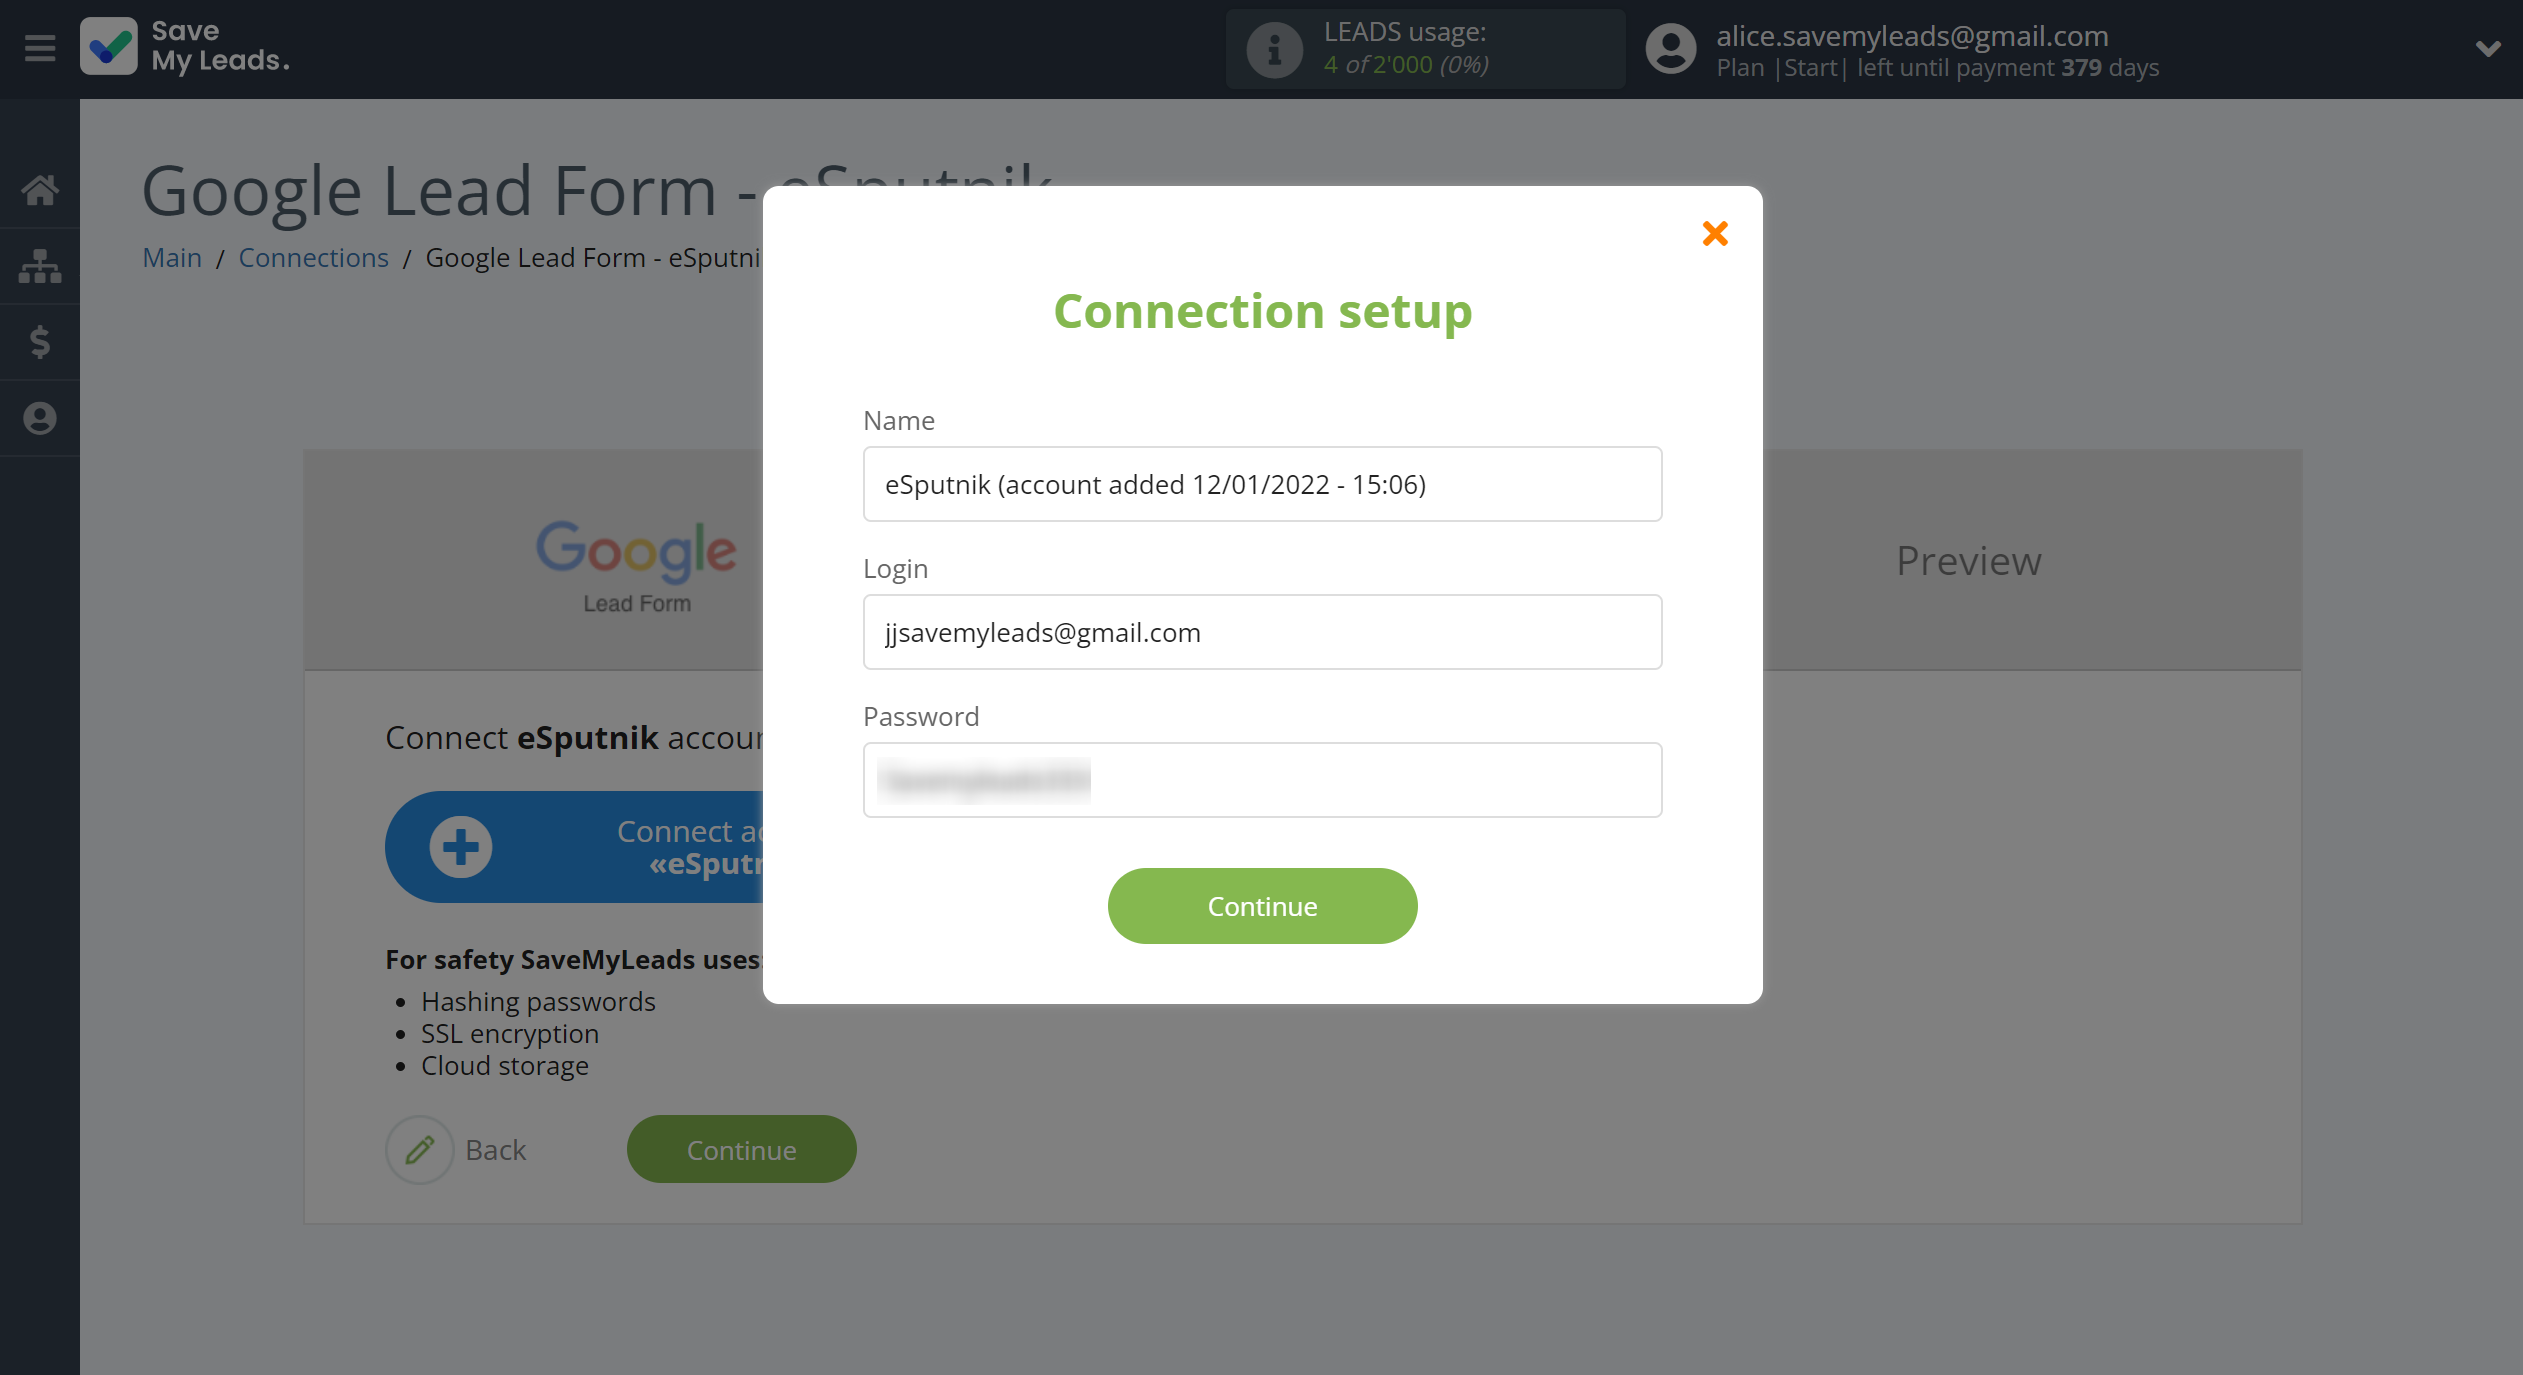 How to Connect Google Lead Form with eSputnik Add Contacts | Data Destination account connection